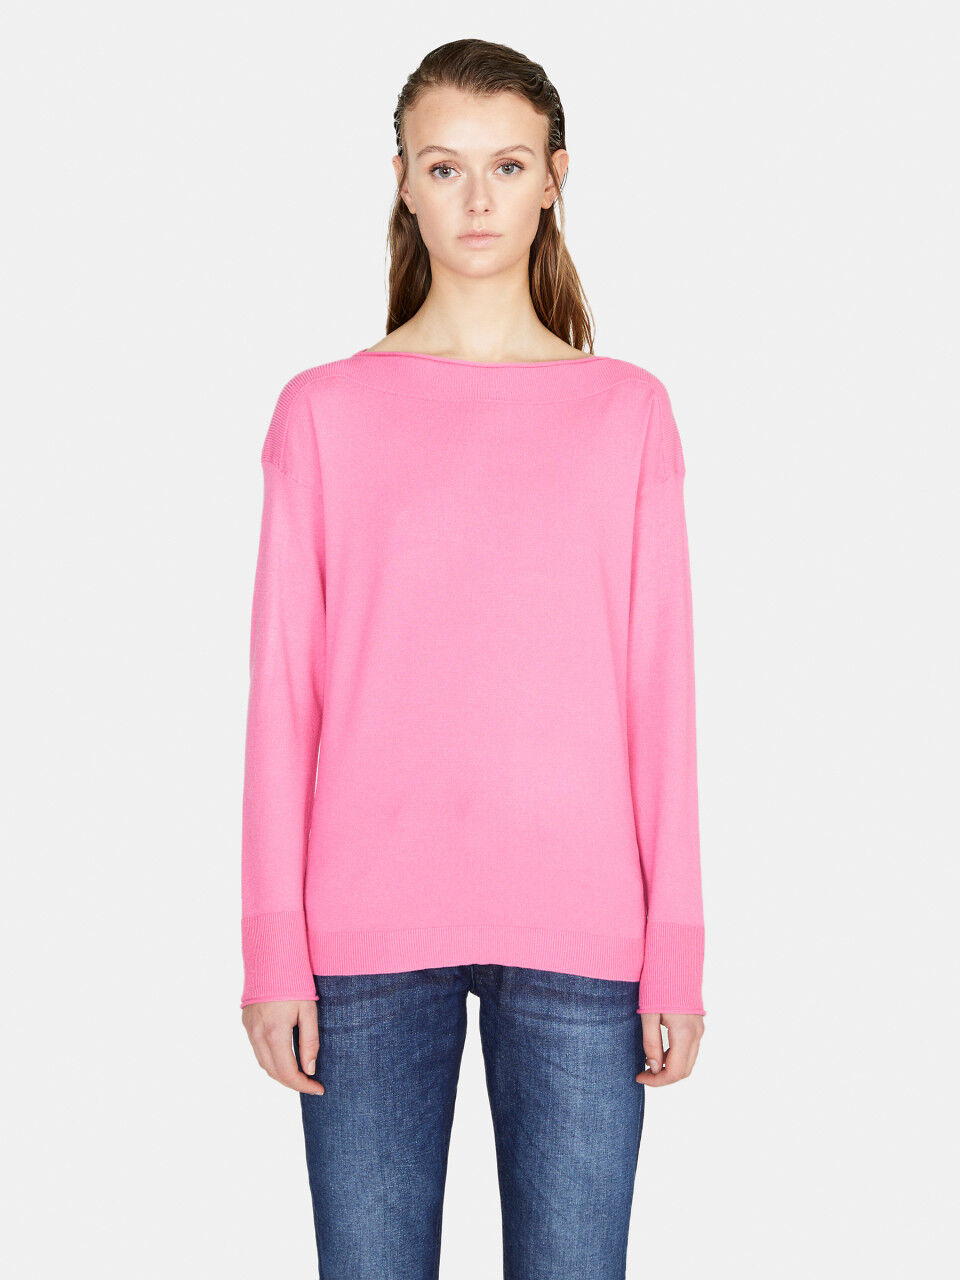 Solid color sweater with boat neck